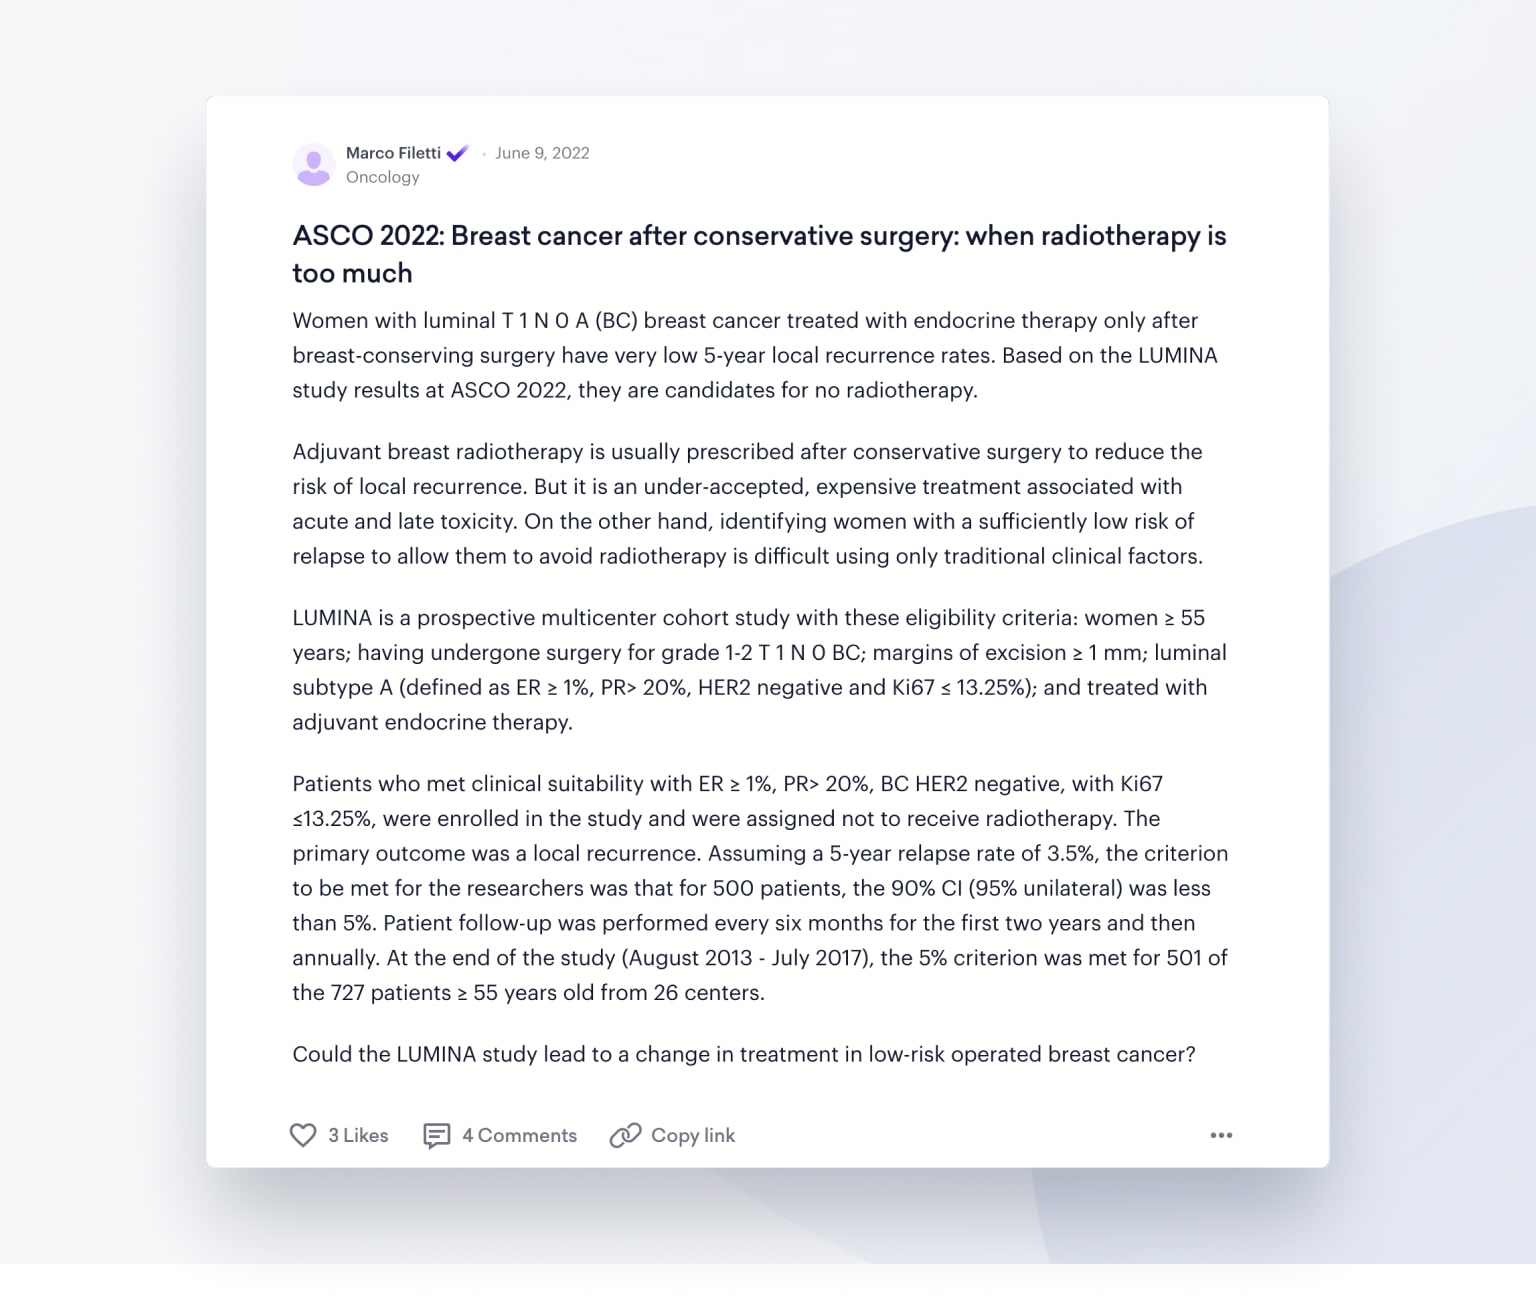 ASCO recap post from 2022 from Sermo doctor about breast cancer after conservative surgery and when radiotherapy is too much